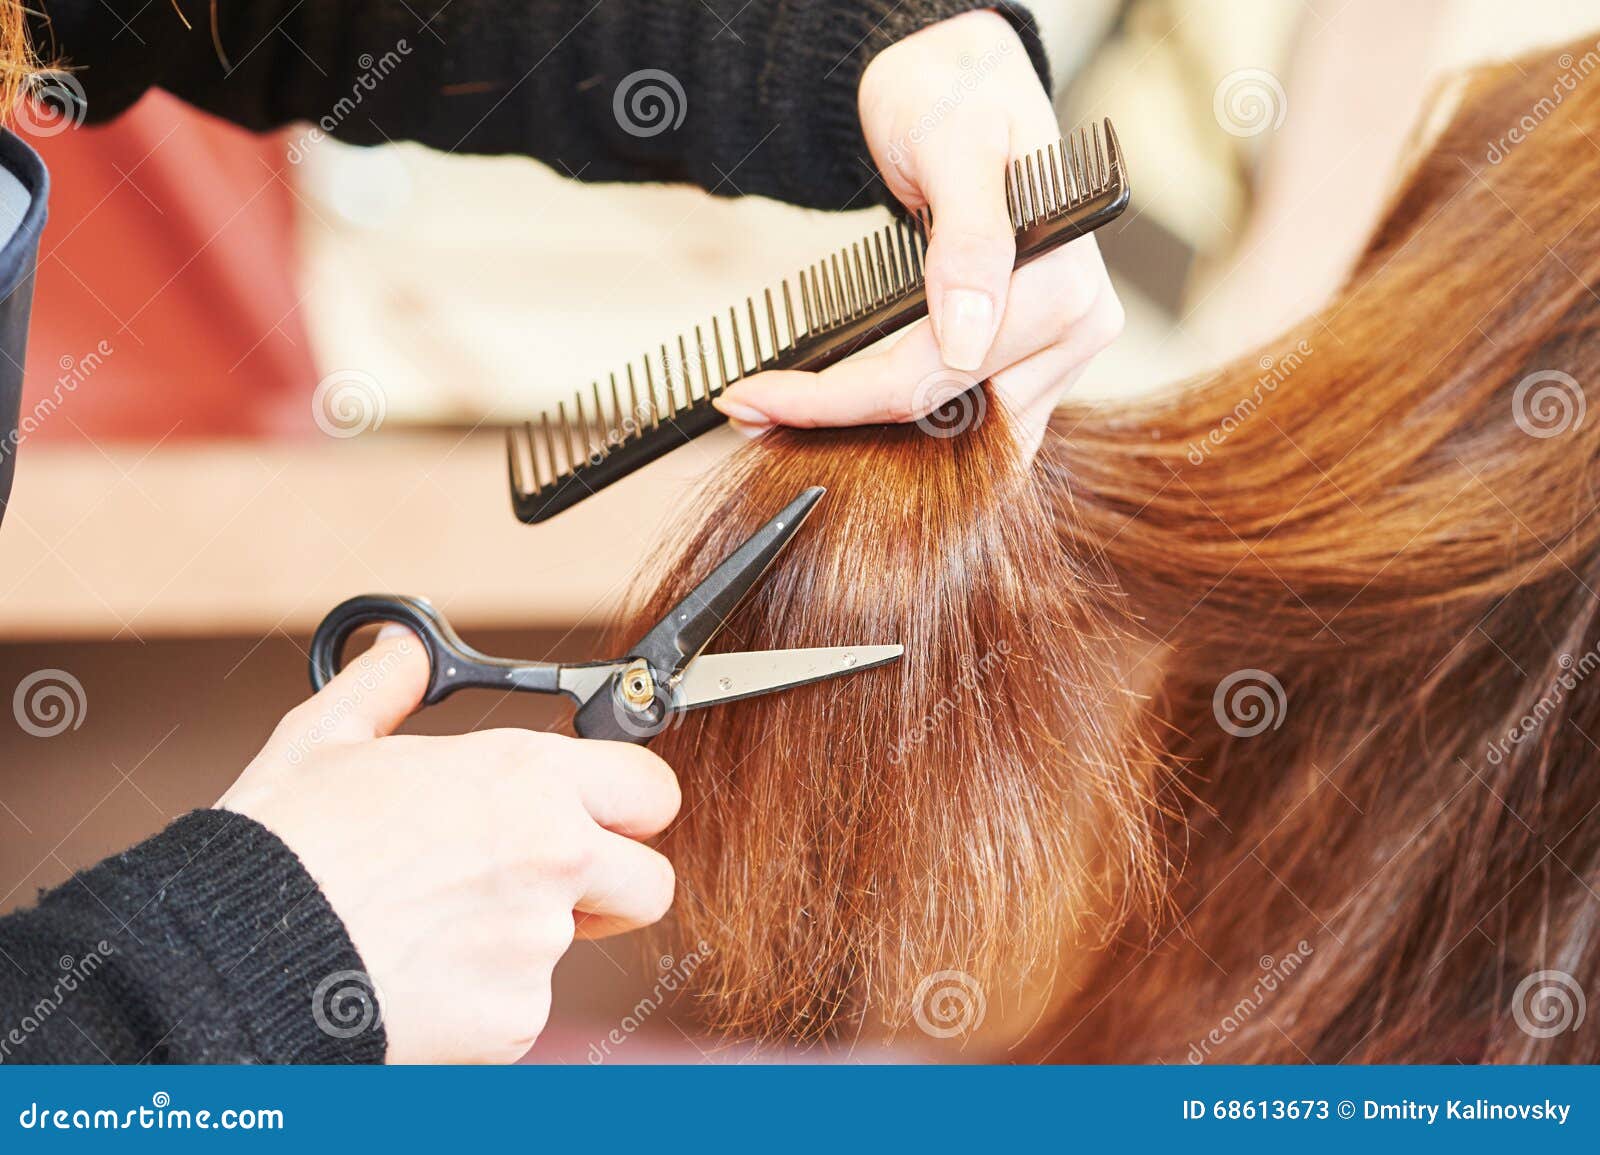 hands of professional hair stylist with scissors and comb